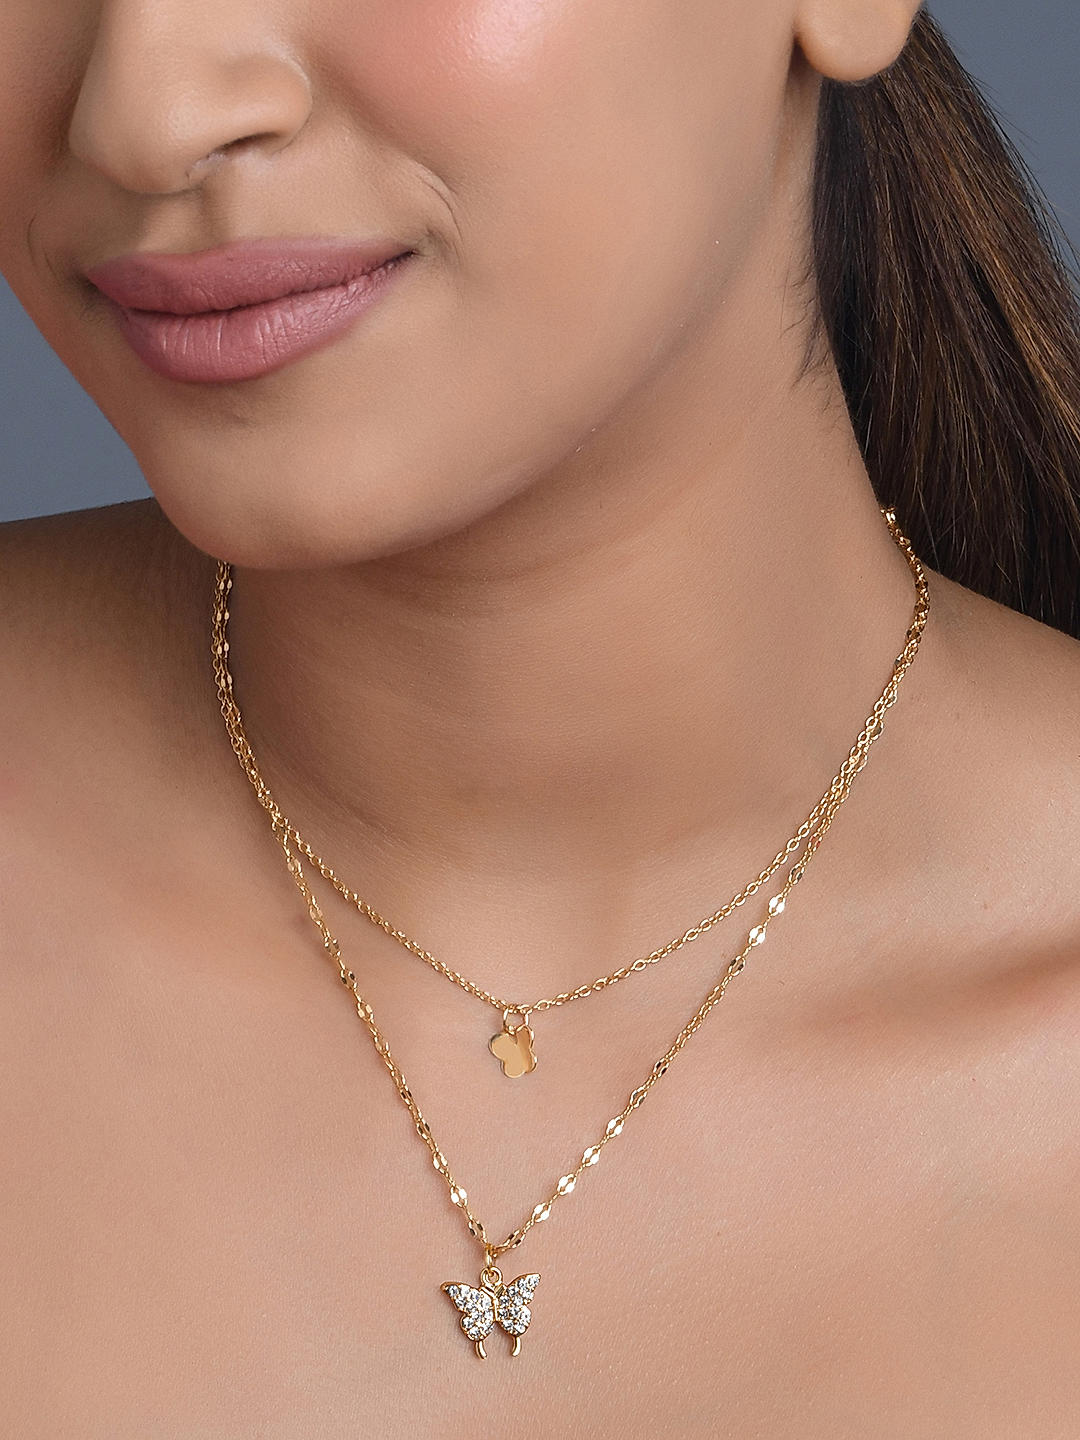 Buy Small Heart Locket Necklace Gold Charm Necklace Gold Heart Locket  Jewelry Gift for Her Valentine's Day Gift Minimalist Jewelry Gold Jewelry  Online in India - Etsy